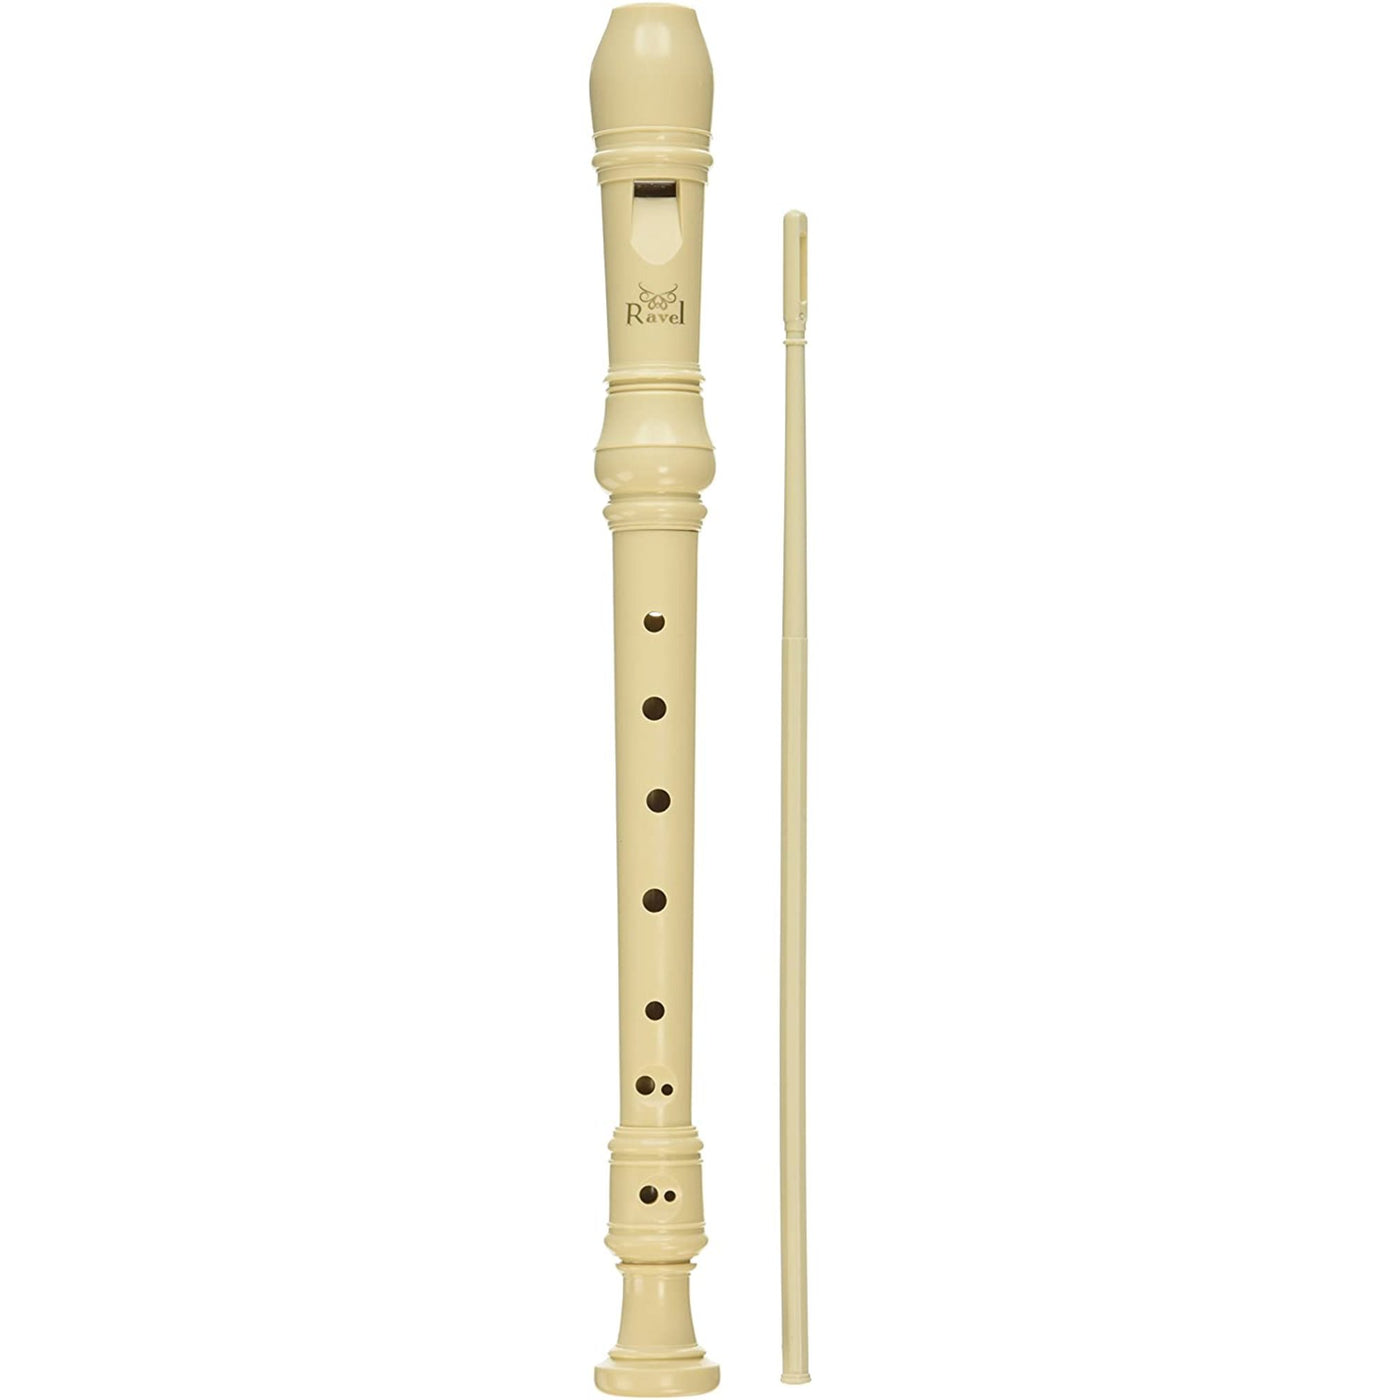 Ravel Recorder with Cleaning Rod and Bag, Ivory (EM570IV)